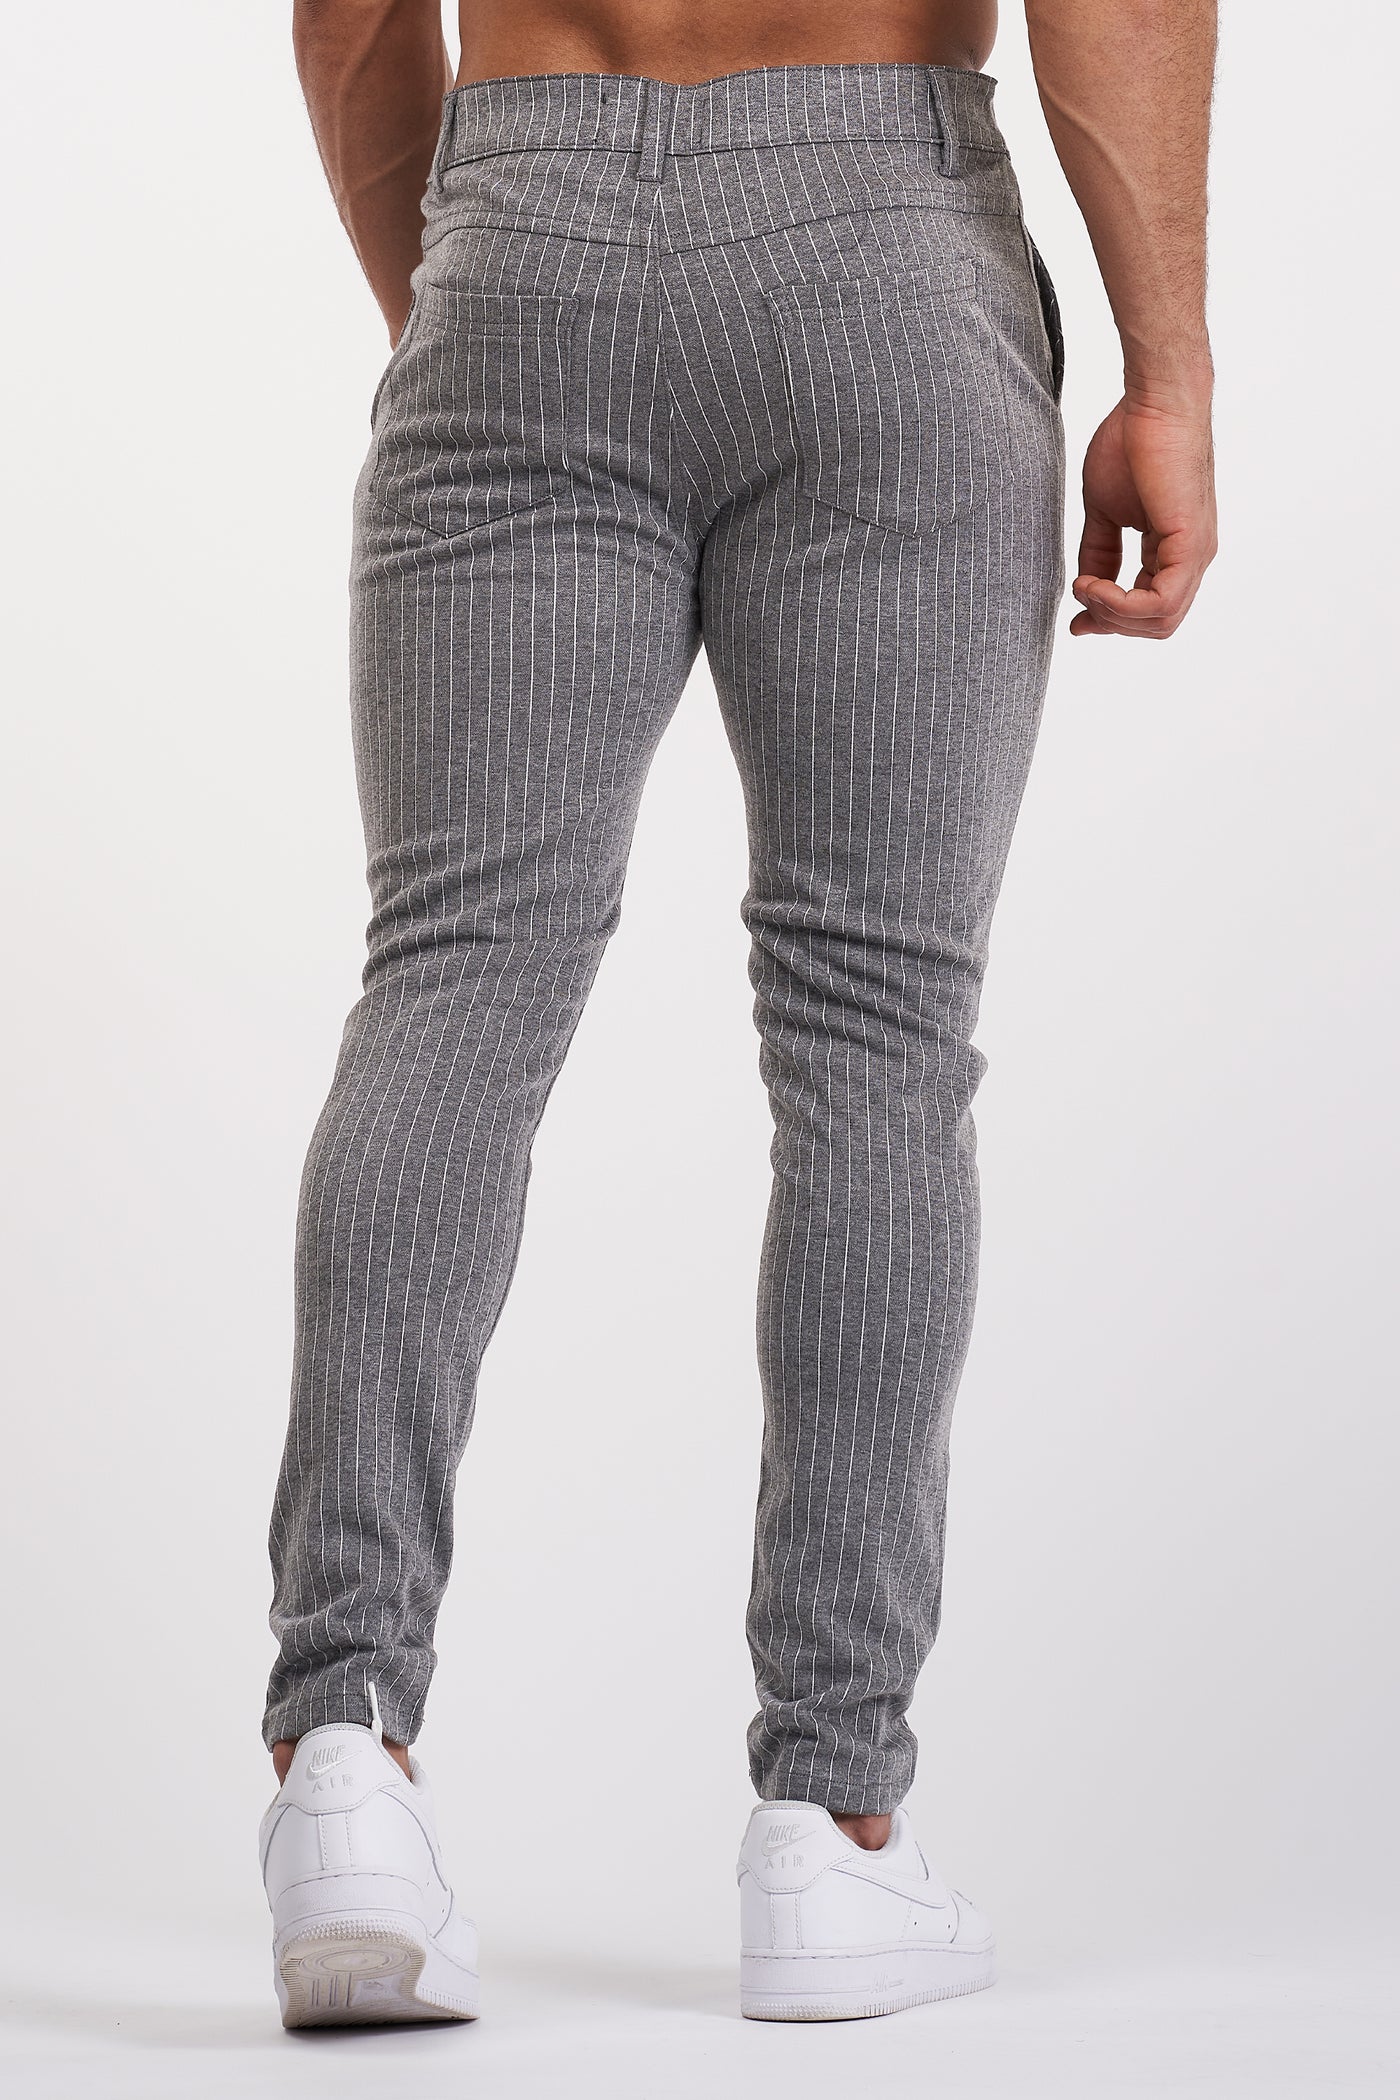 THE NOCO TROUSERS - GREY - ICON. AMSTERDAM